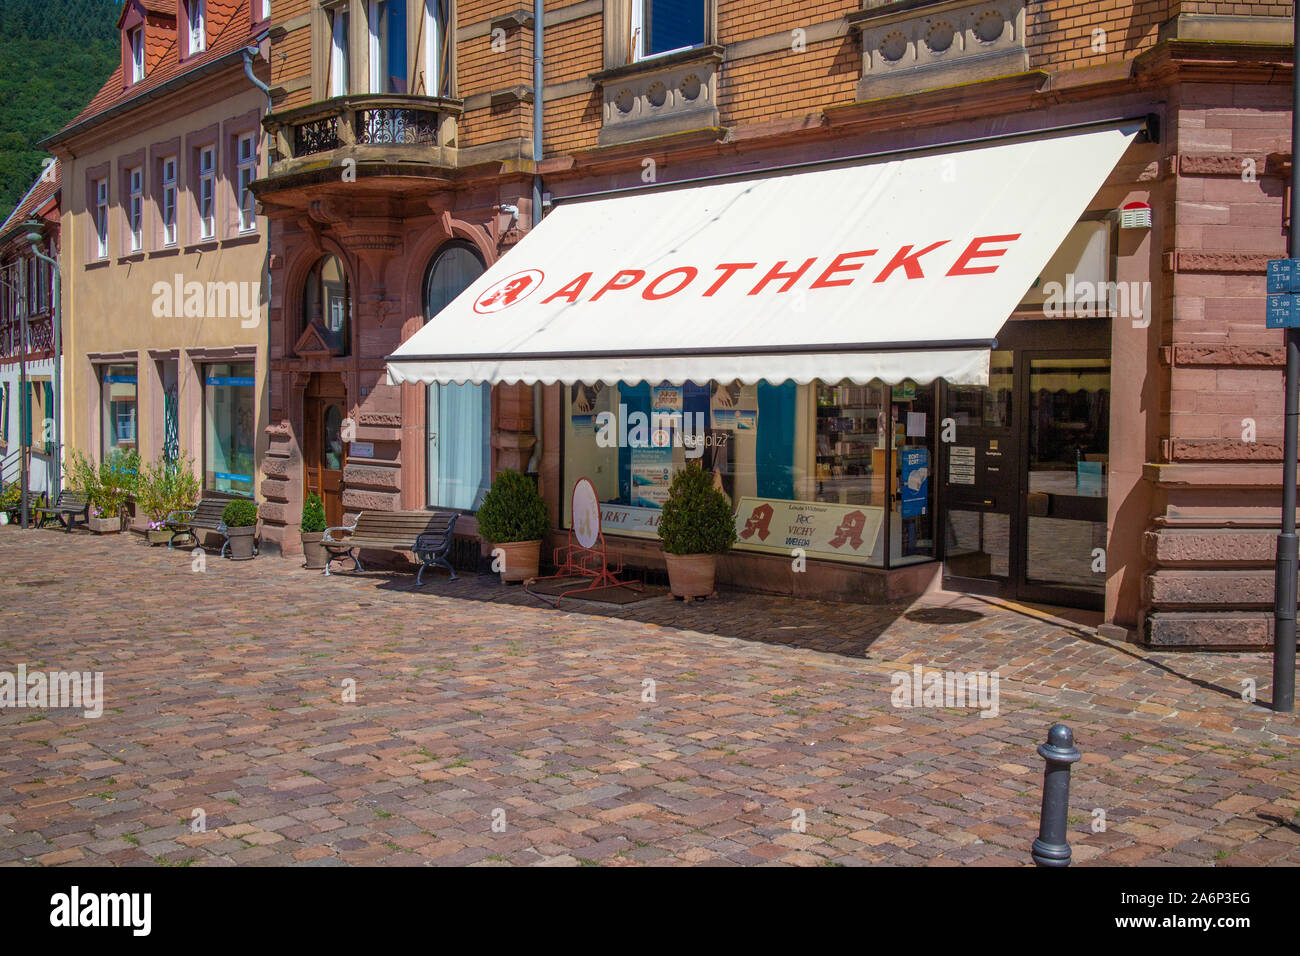 Neckargemünd, Germany - August 18, 2019: Exterior view of a pharmacy in Neckargemünd, Southern Germany with sun protection sail Stock Photo